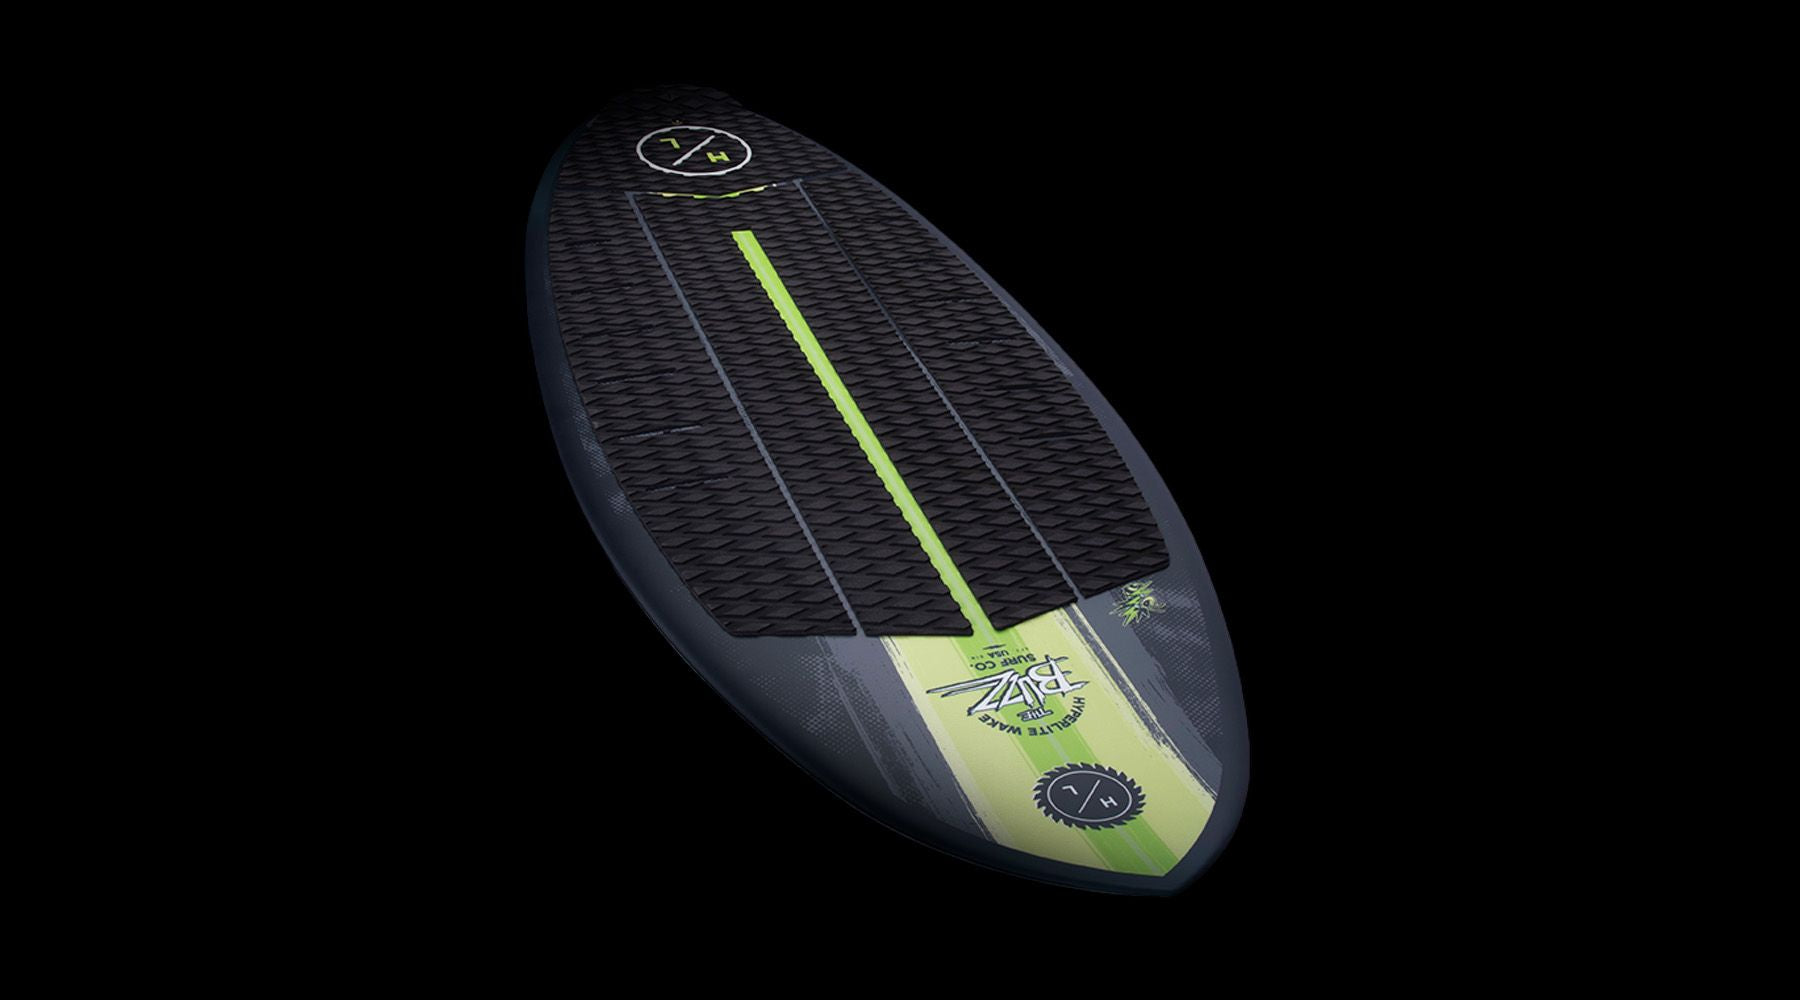 A Hyperlite 2023 Buzz Wakesurf Board in black and green on a black background featuring DuraShell Construction.